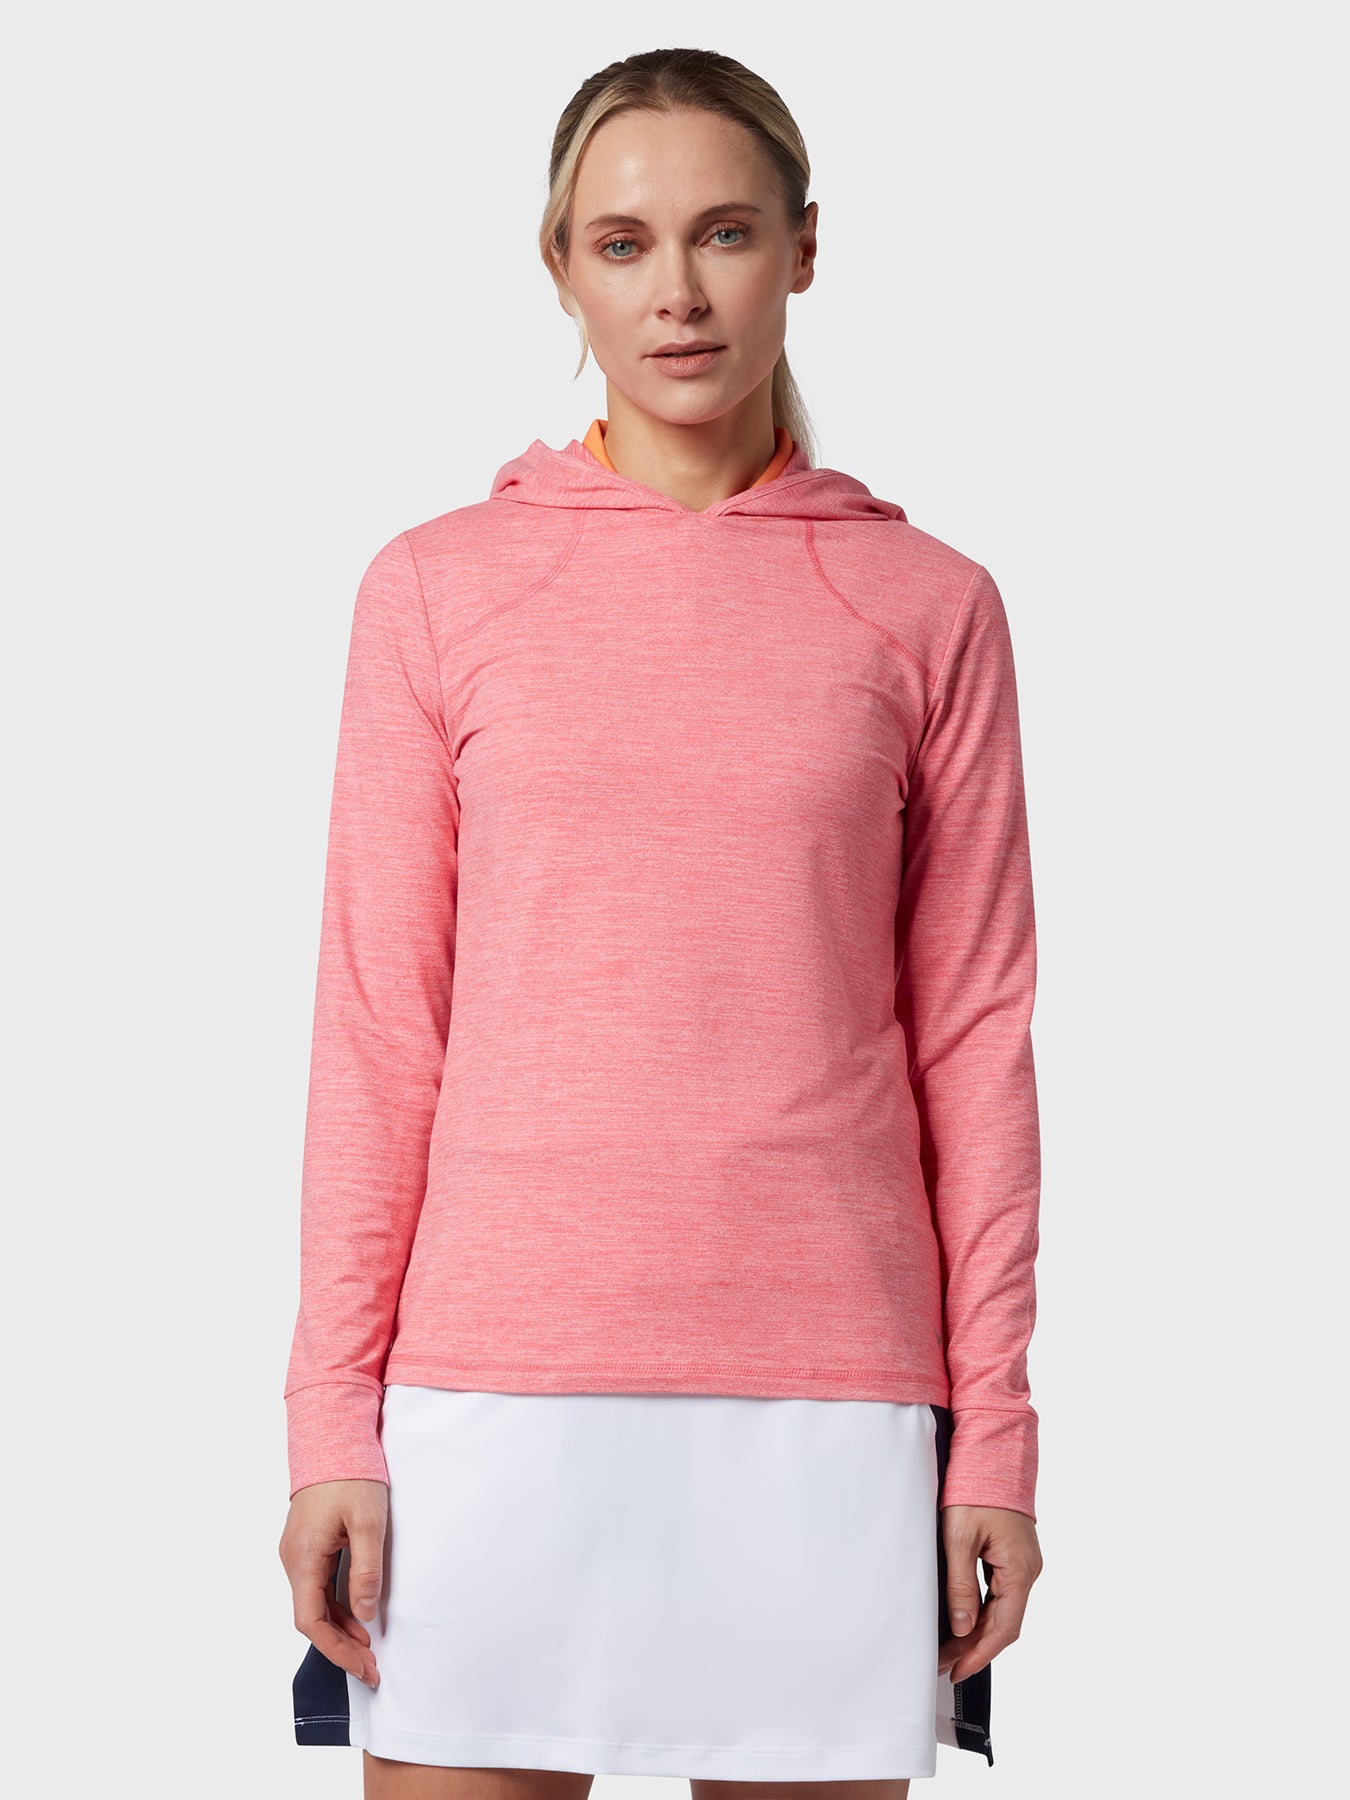 View Brushed Heather Womens Hoodie In Fruit Dove Heather information